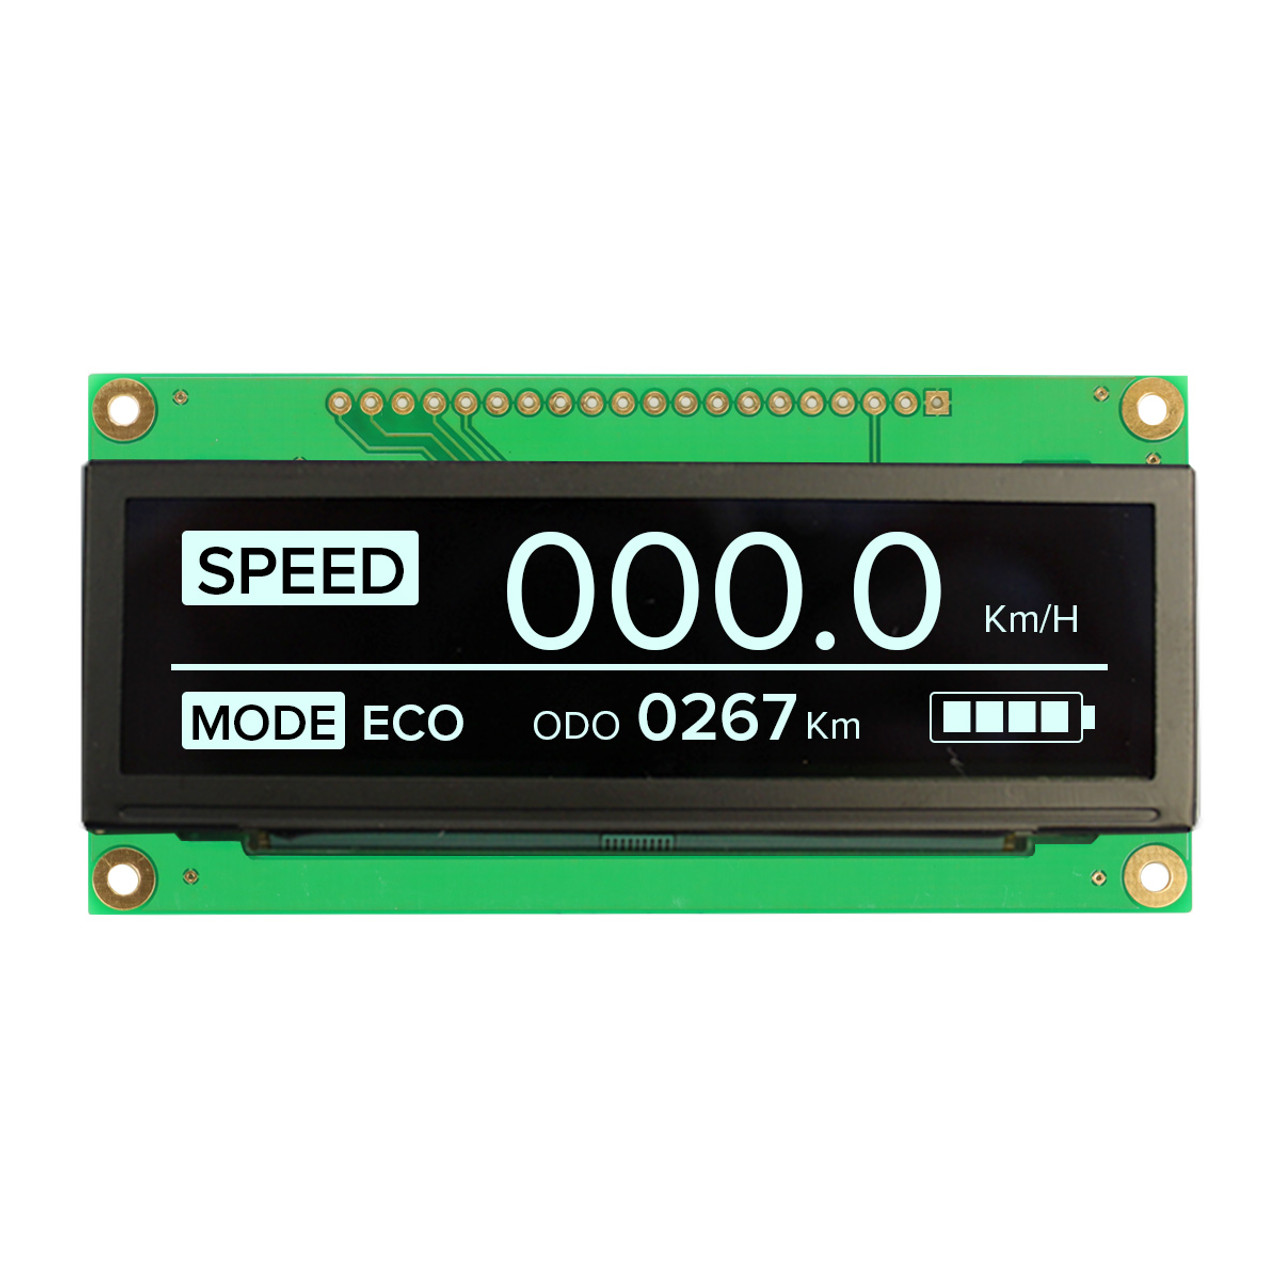 OLED Display Arduino 3.2 Graphic Serial Module 256x64,Blue on Black